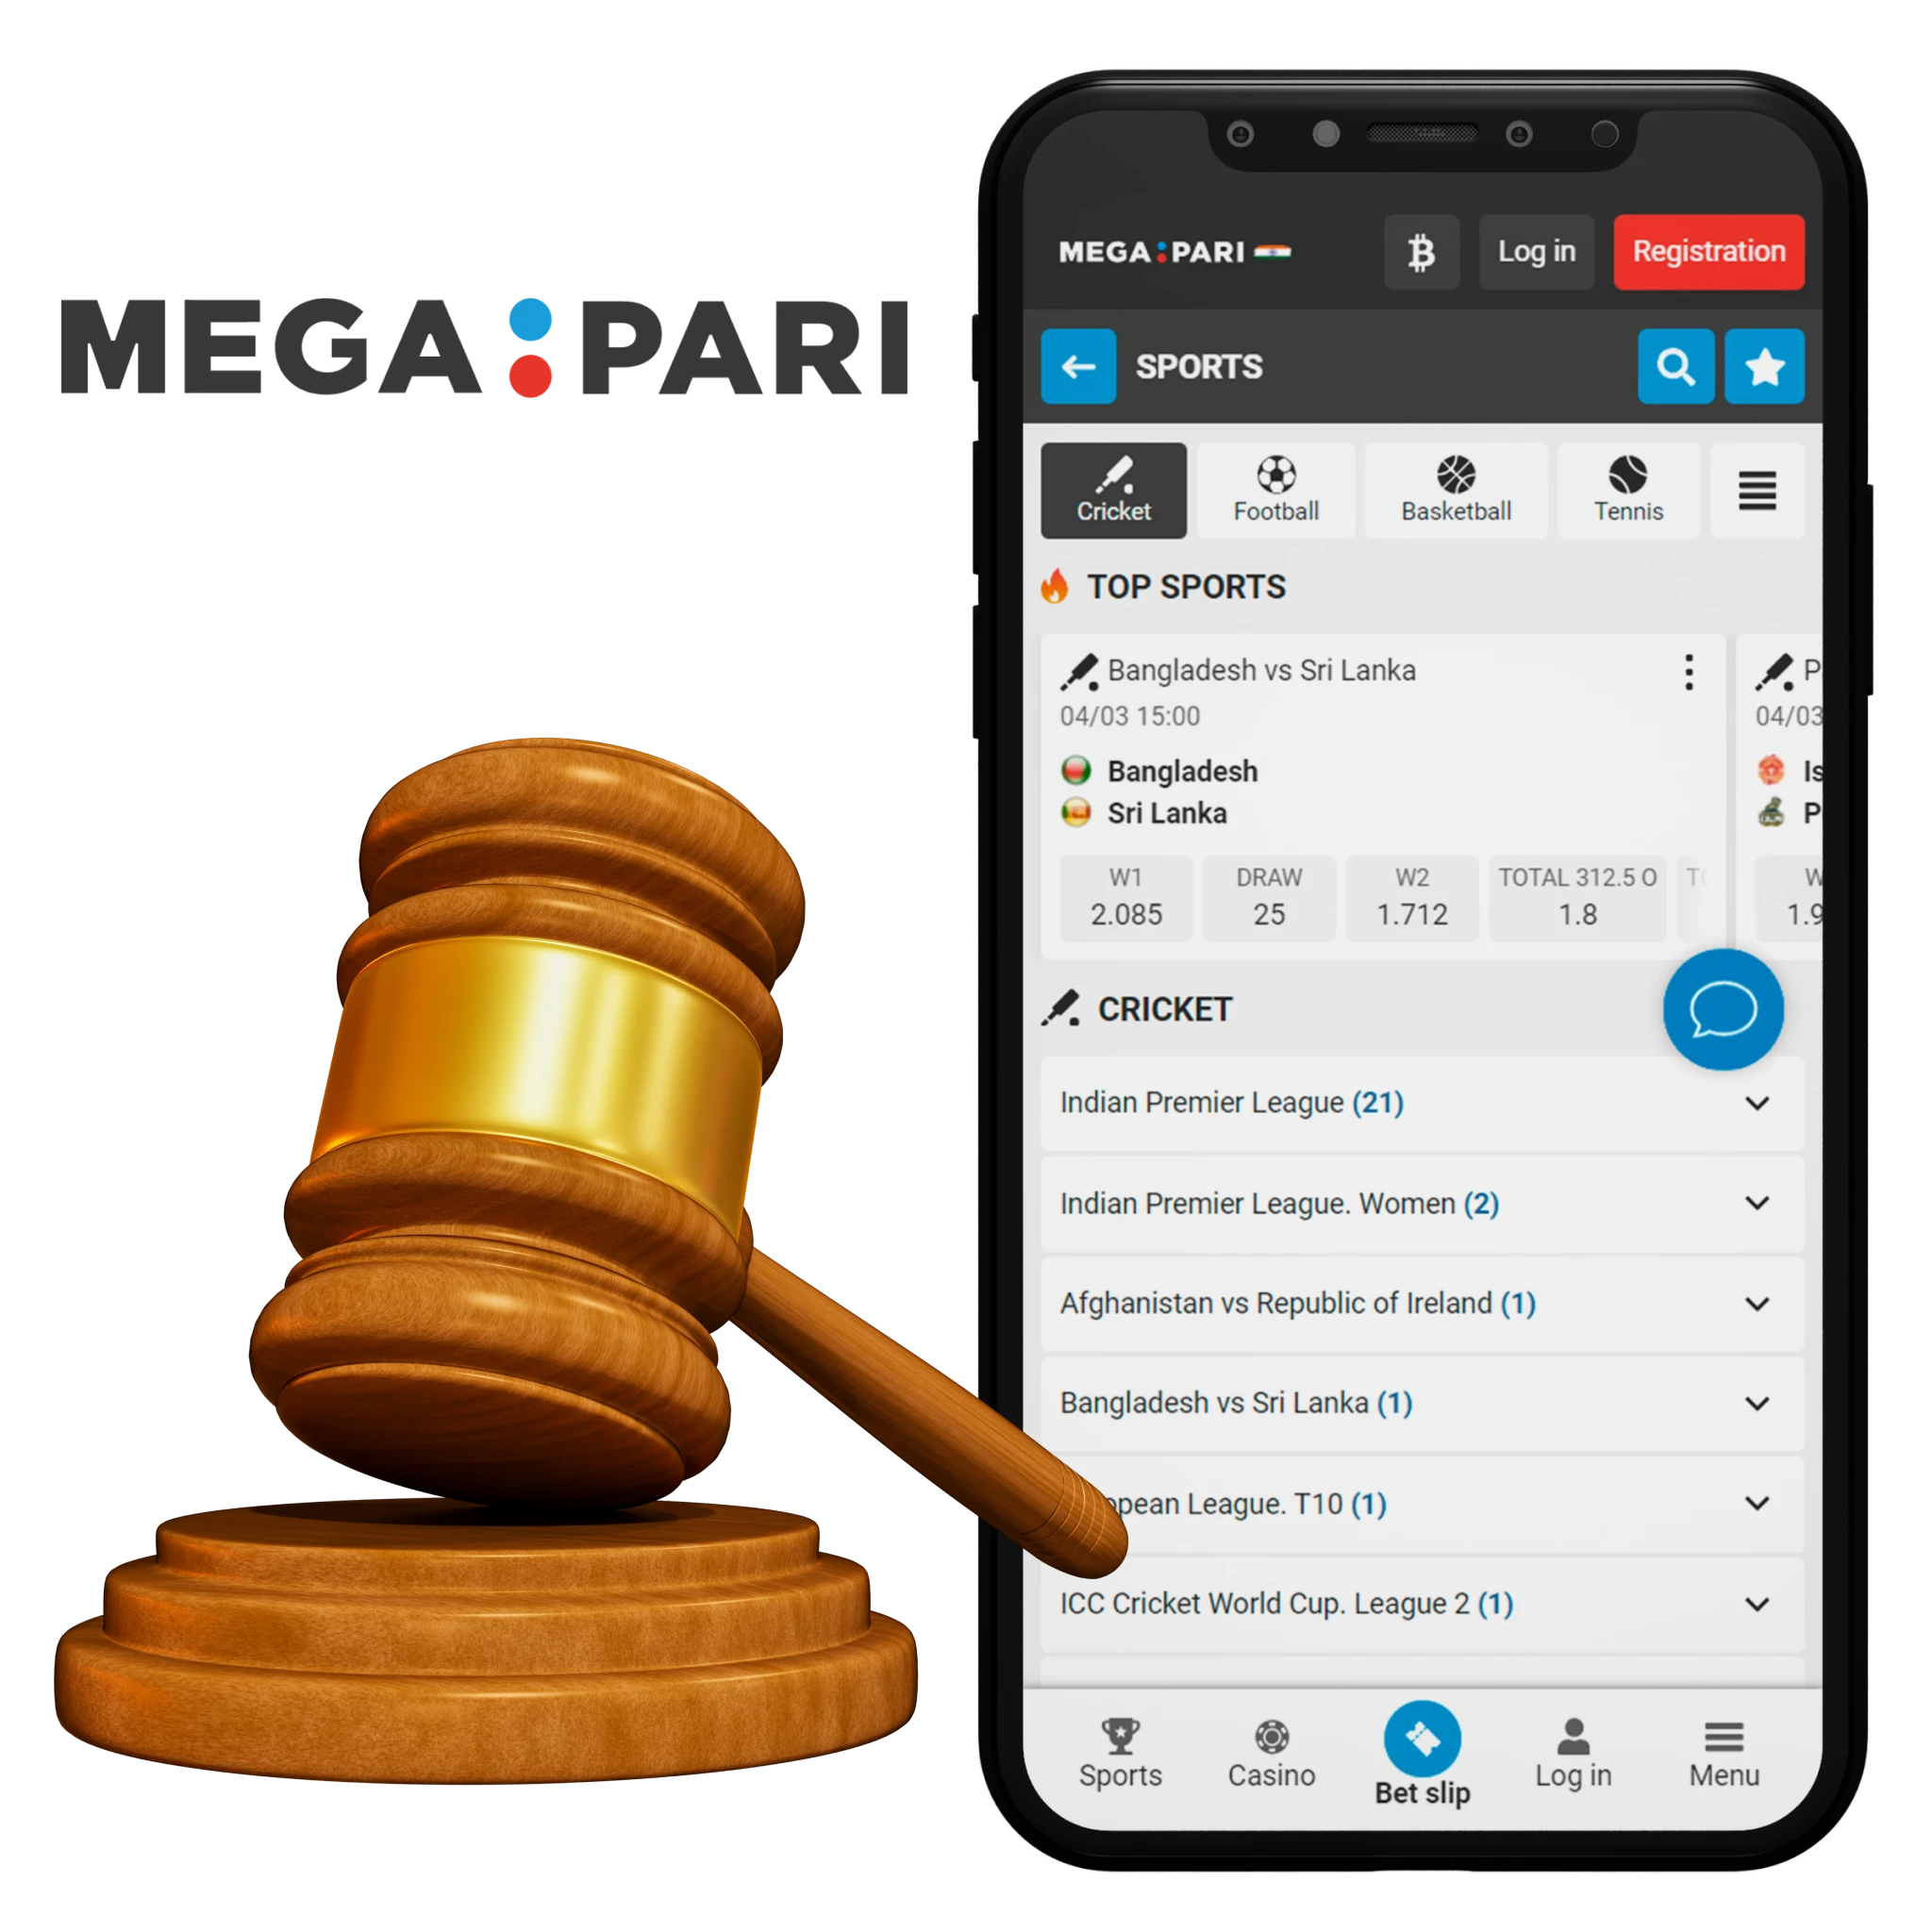 The MegaPari app provides a wide range of bonuses and promotions for legal cricket betting.